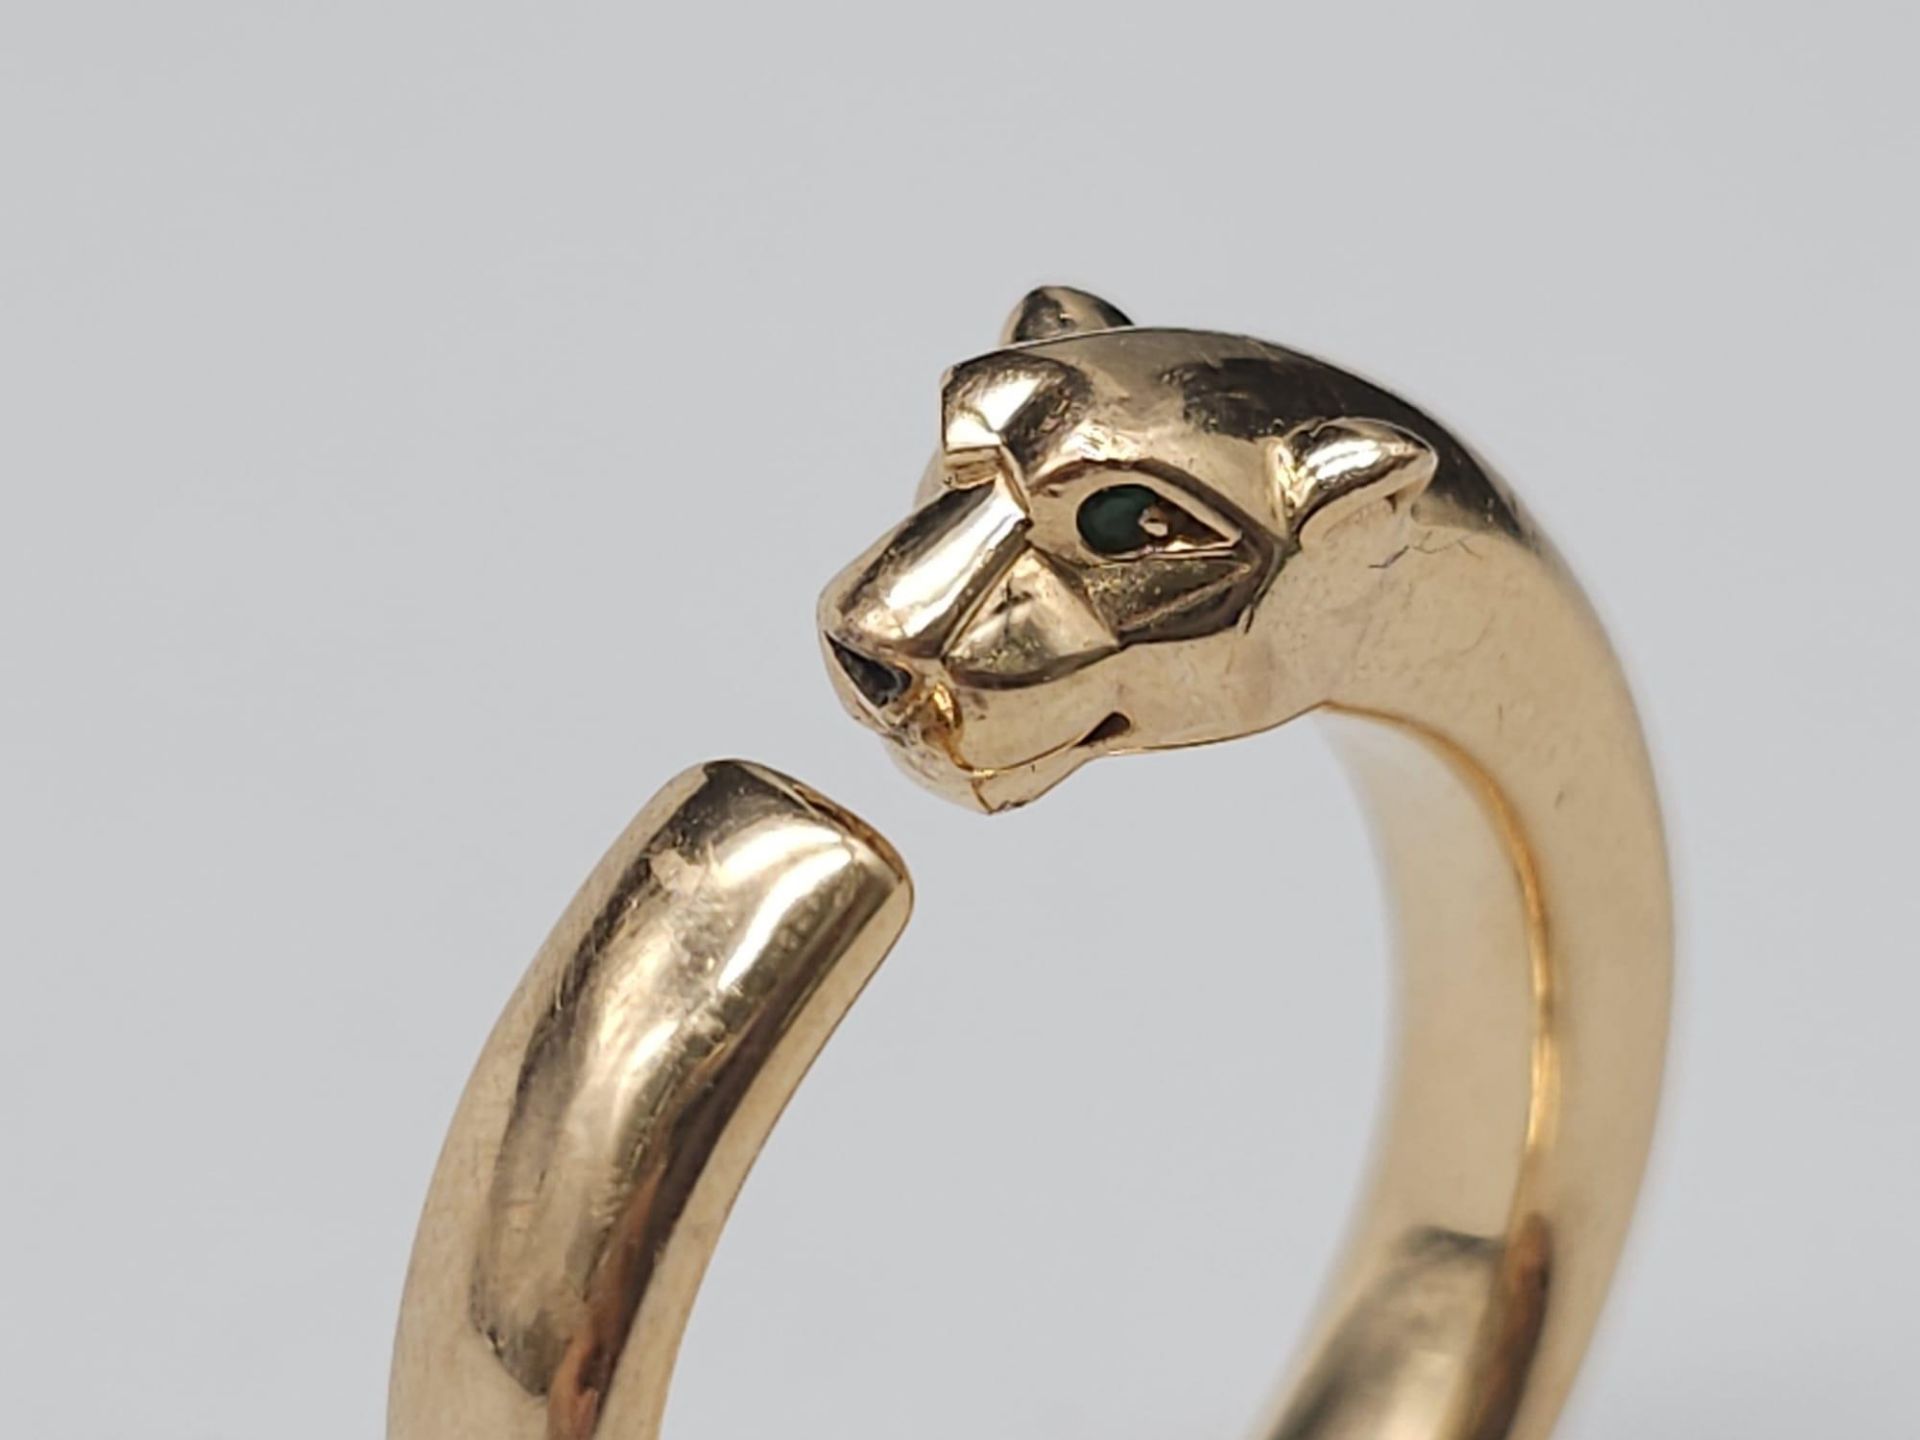 A Cartier 18K Rose Gold Panther Ring with Onyx and Tsavorite Eyes. Size O. 11.1g total weight. Comes - Image 4 of 11